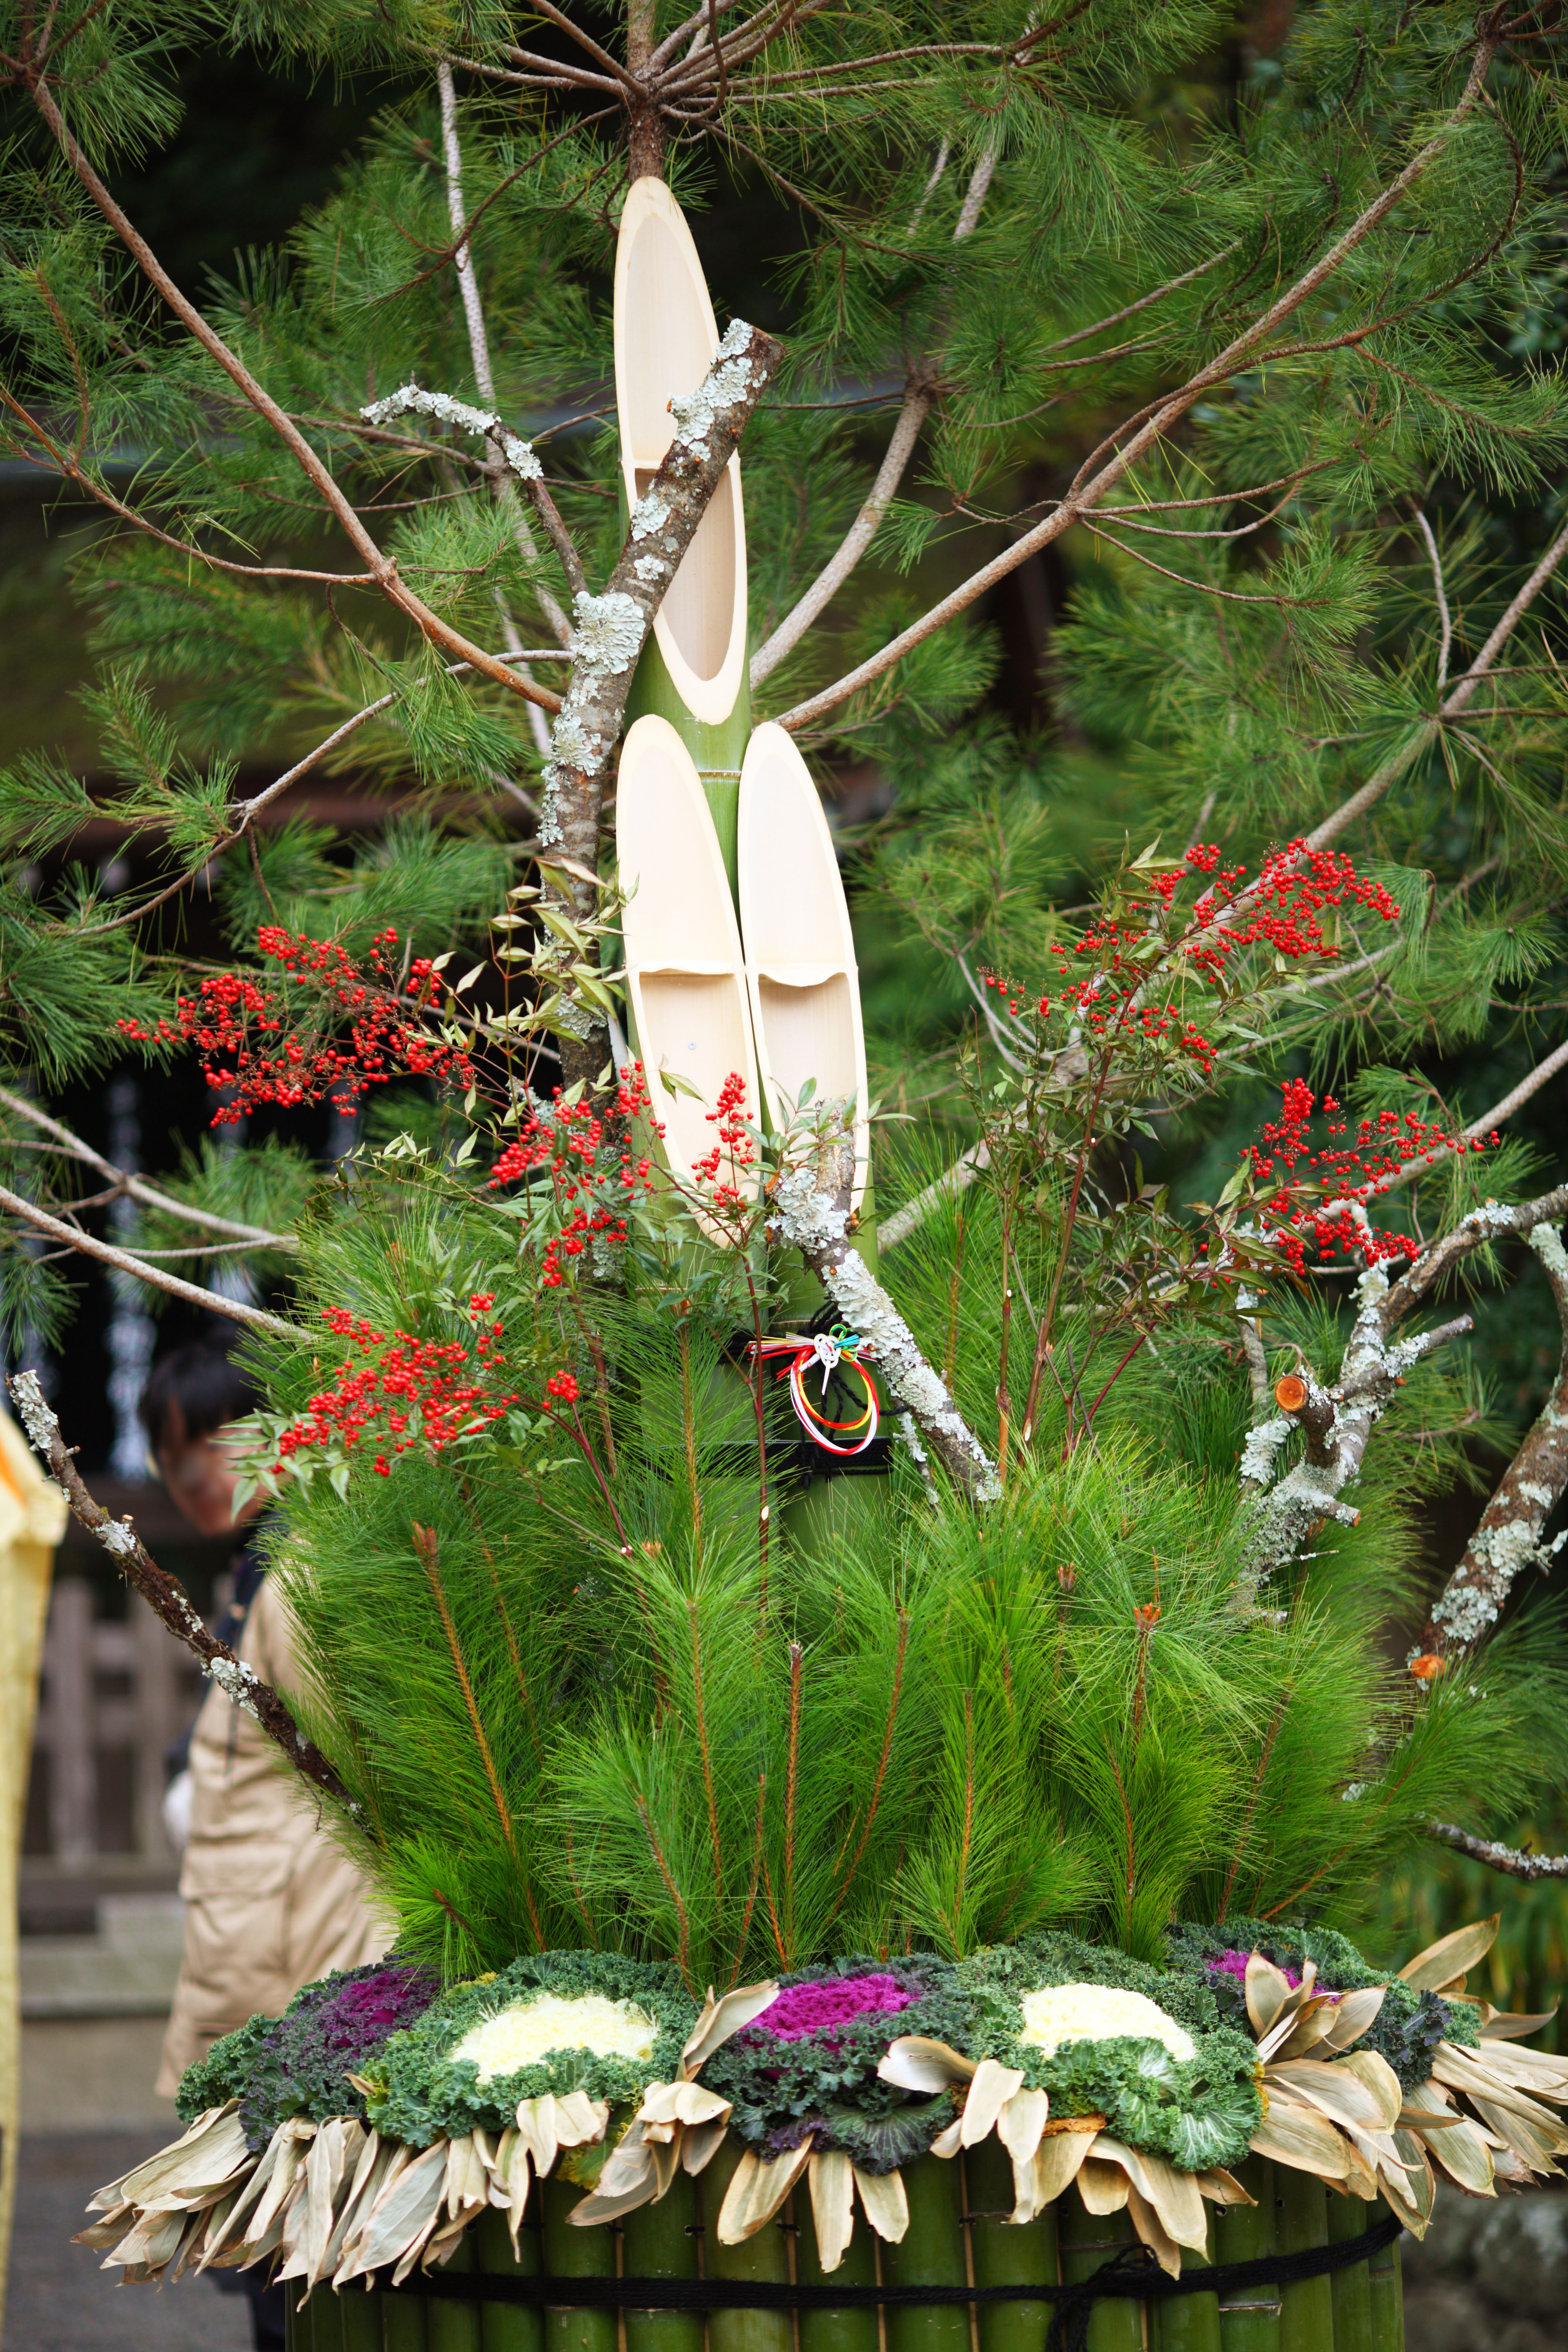 photo,material,free,landscape,picture,stock photo,Creative Commons,Three-wheeled Shinto shrine New Year's pine and bamboo decorations, New Year pine decorations, god controlling a zodiacal year, spirit-dwelling object, Ornamental cabbage